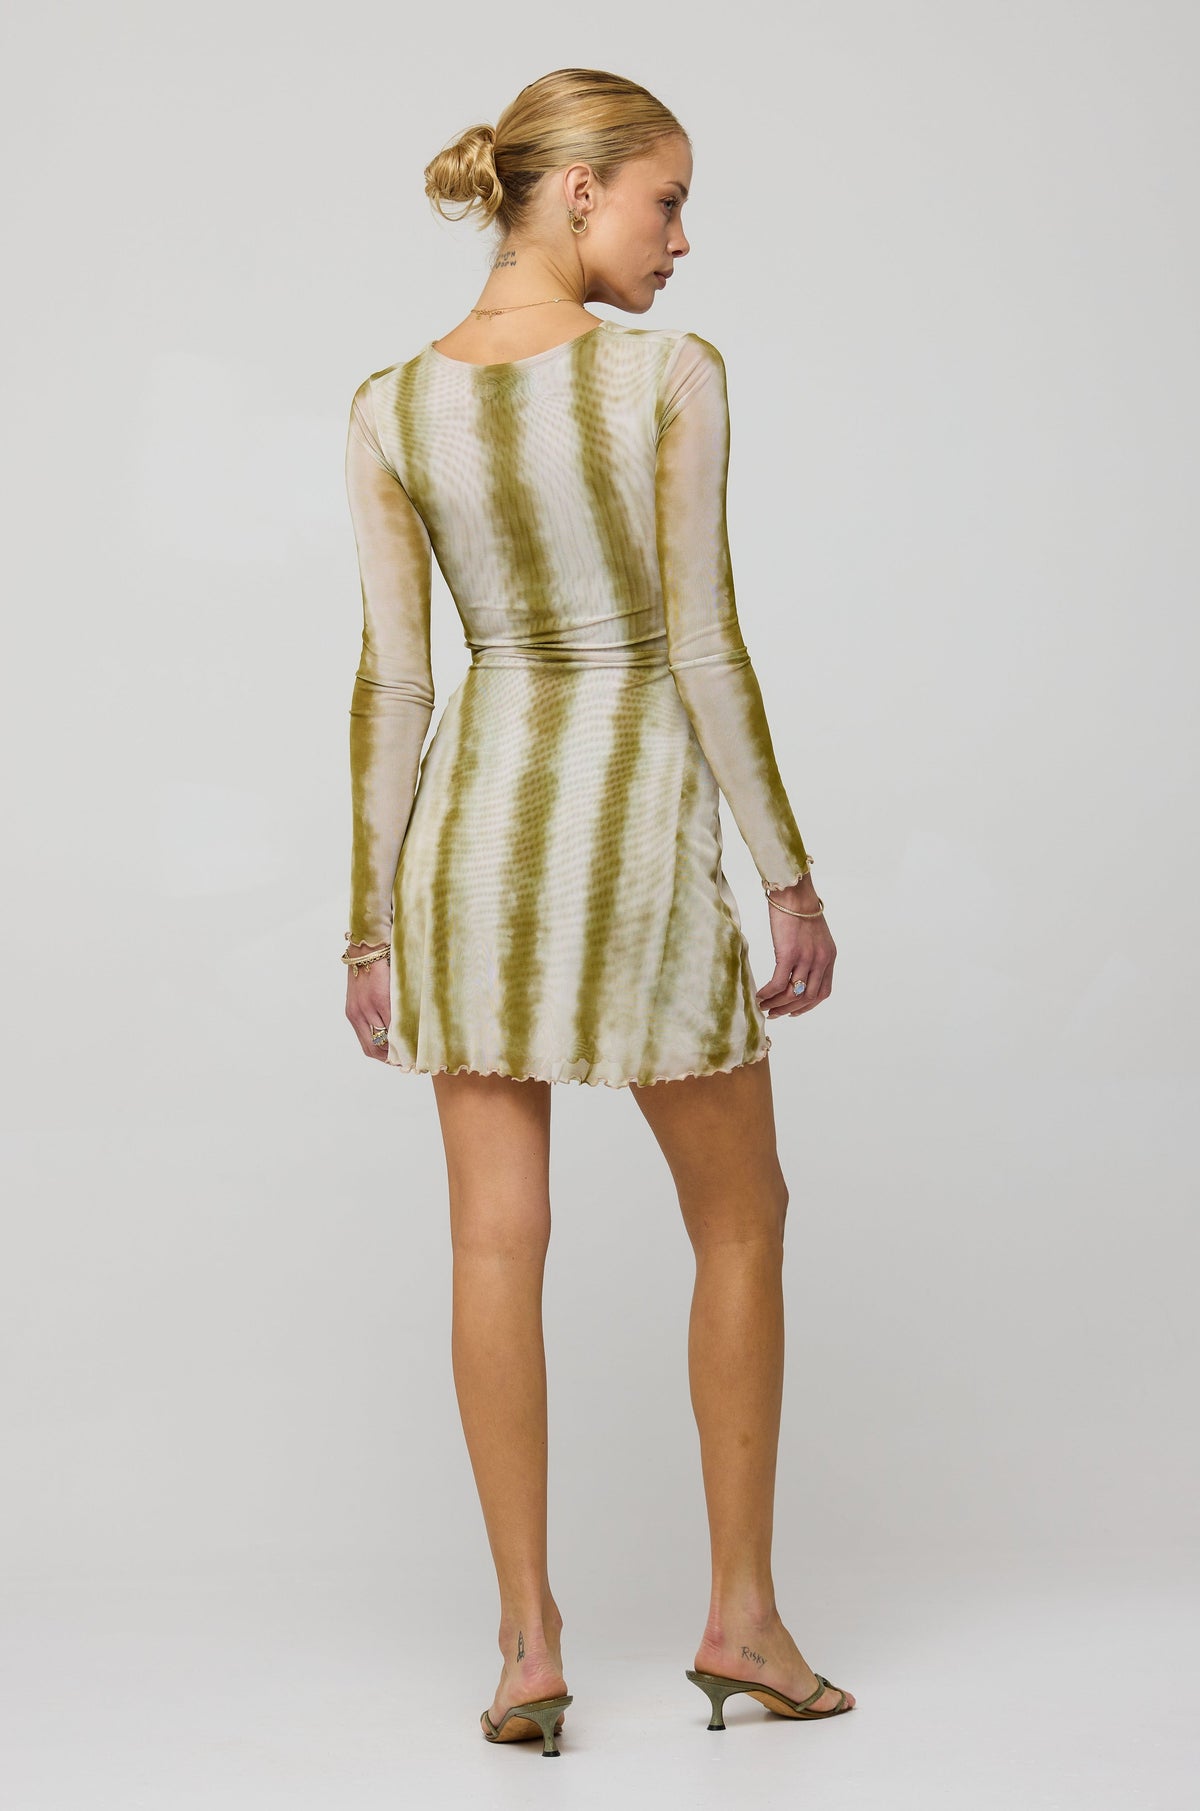 This is an image of Marissa Mini in Dune - RESA featuring a model wearing the dress